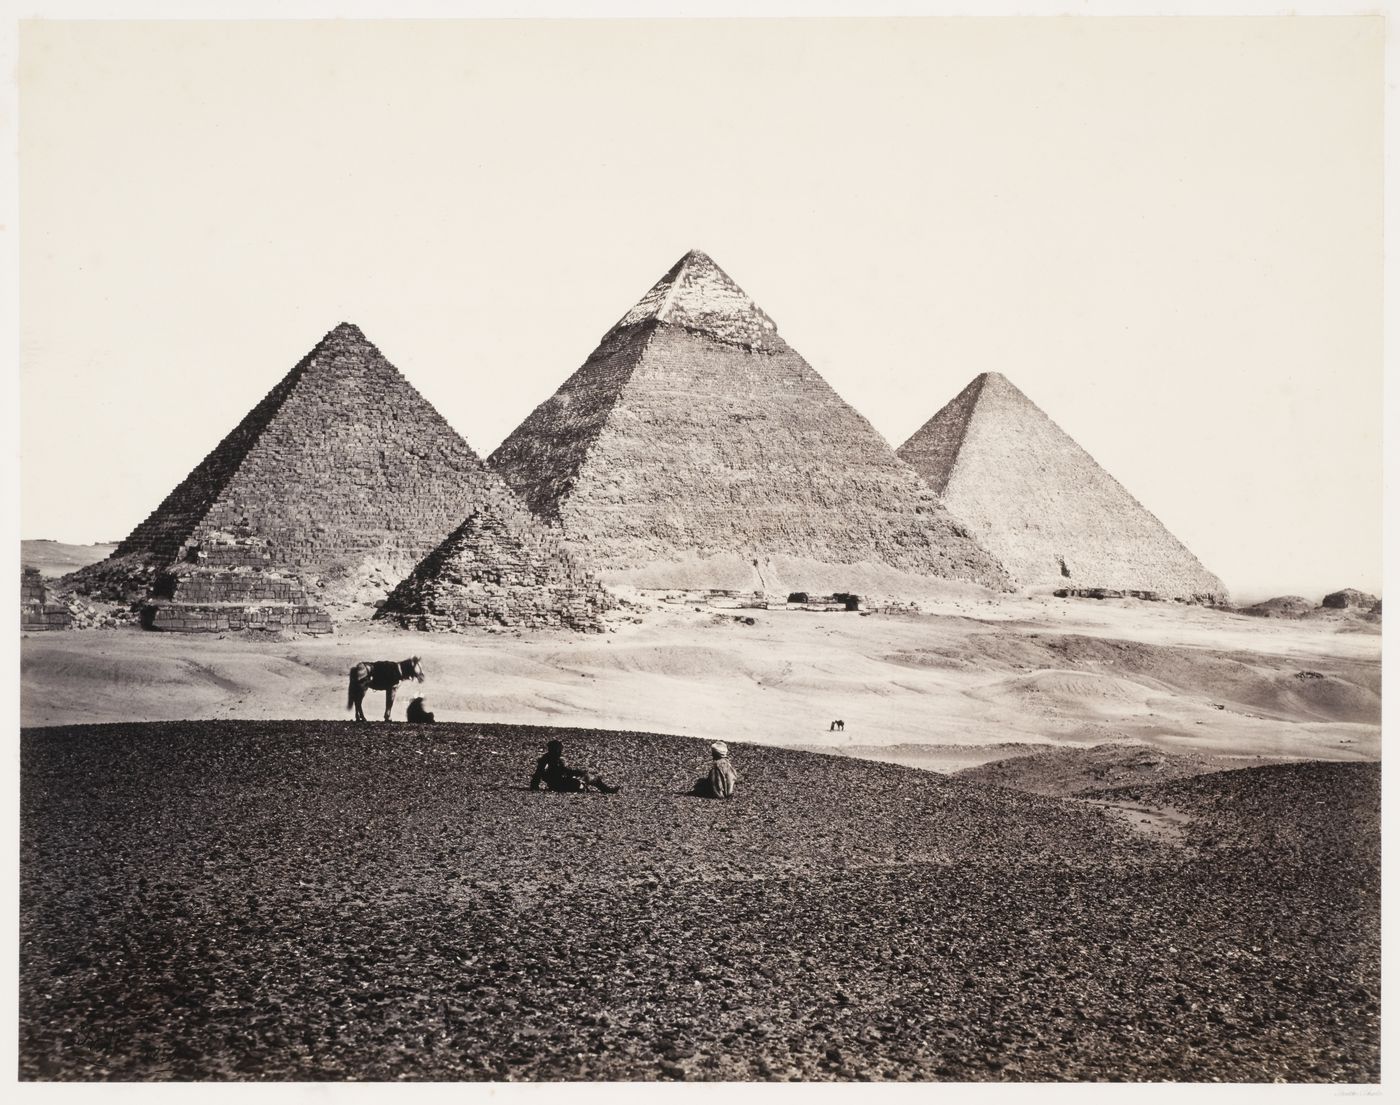 View of the Pyramids of Mycerinus, Chephren and Cheops, figures with horse in foreground, Giza, Egypt